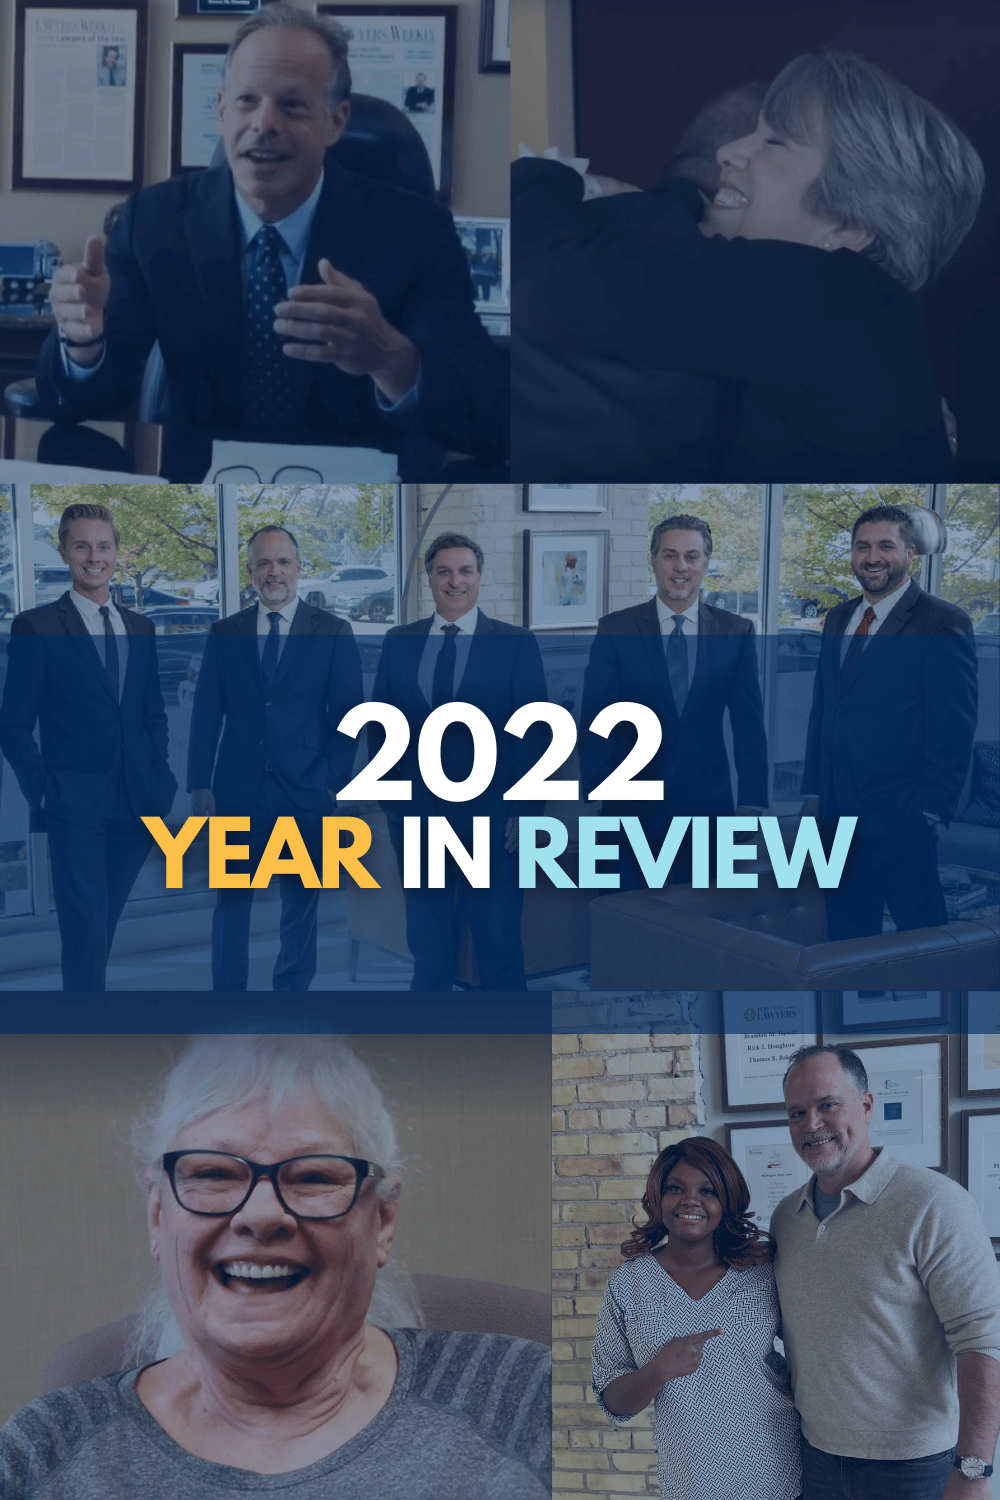 Michigan Auto Law’s 2022 Year In Review